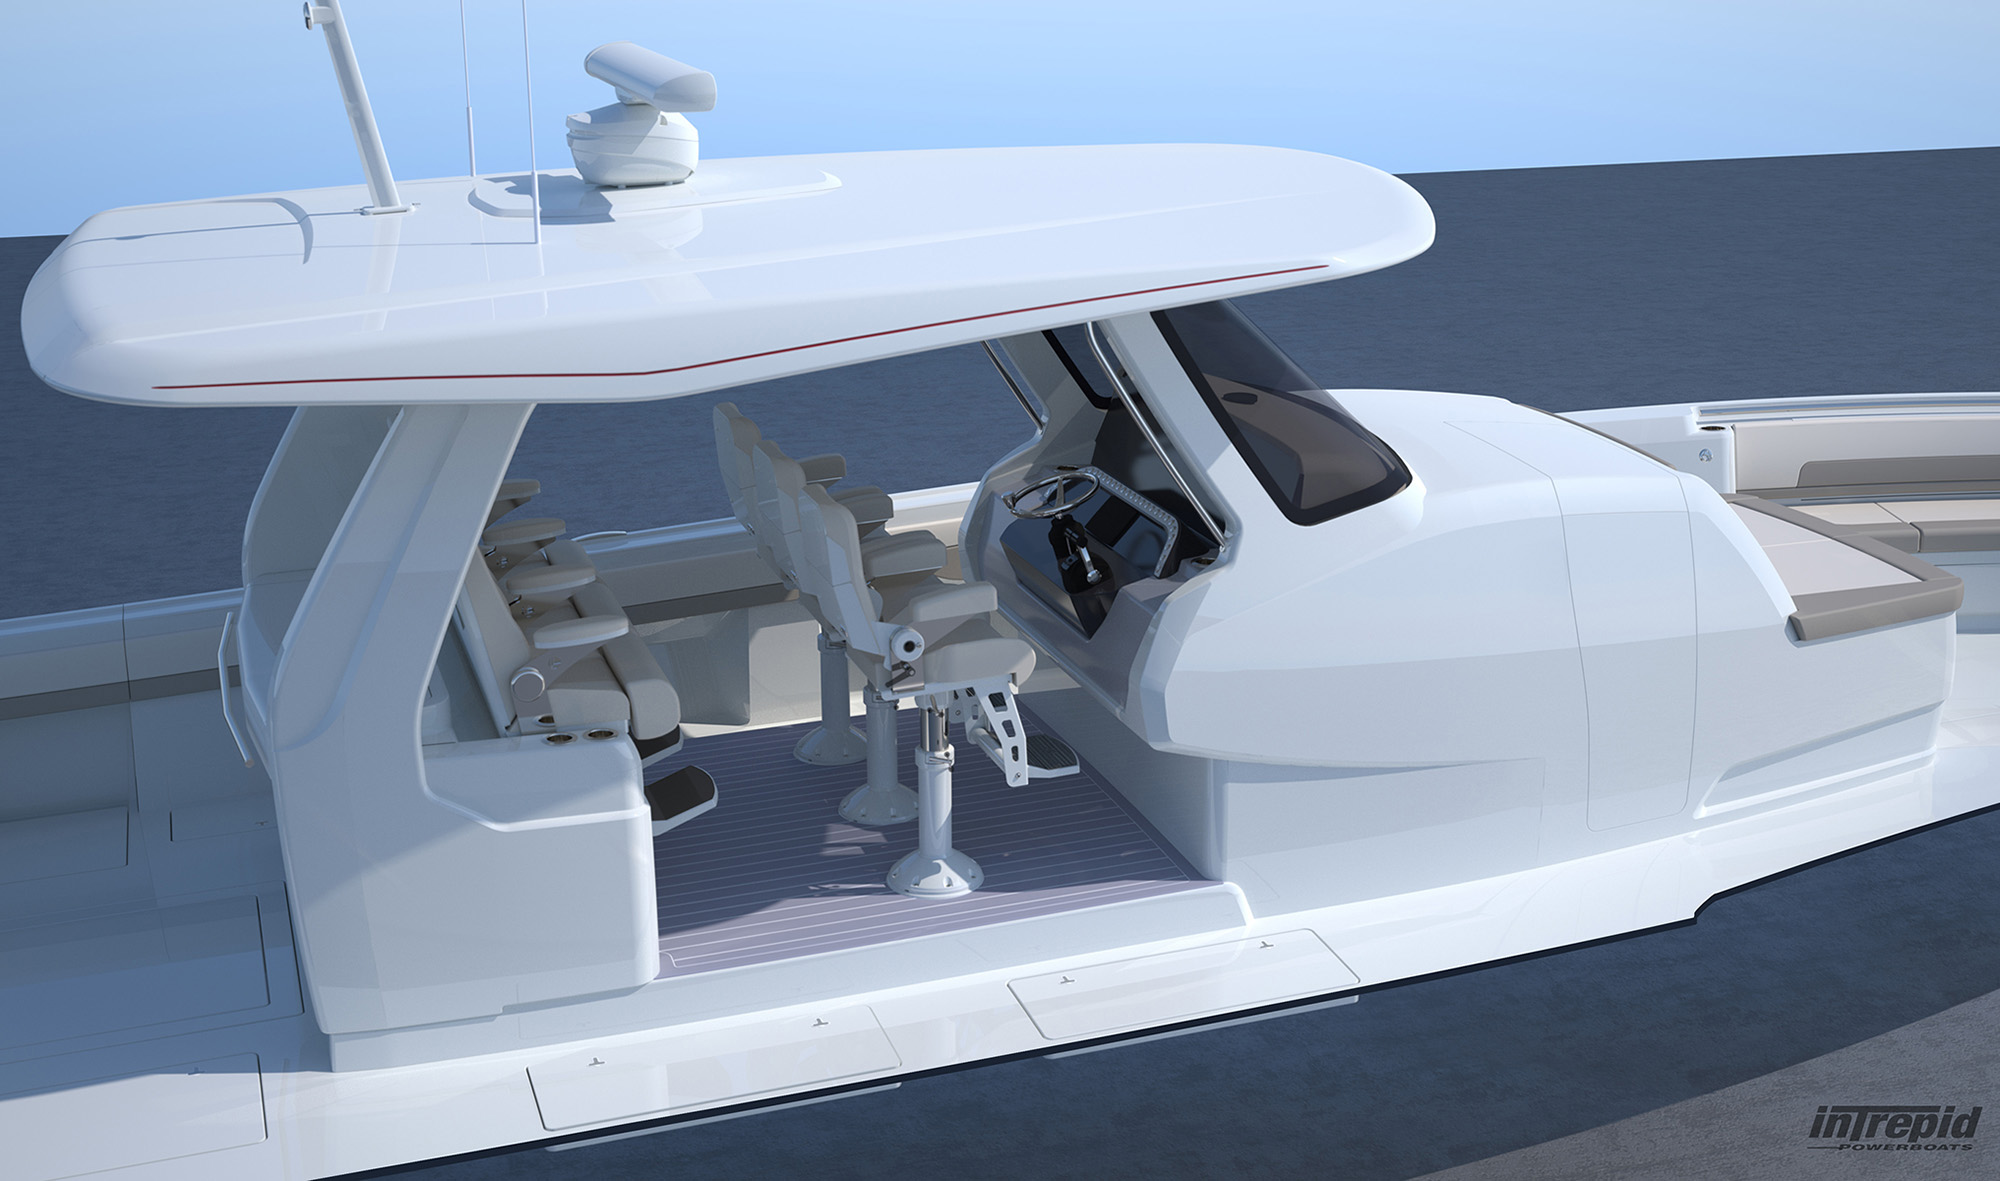 Carr Design | Intrepid Powerboats